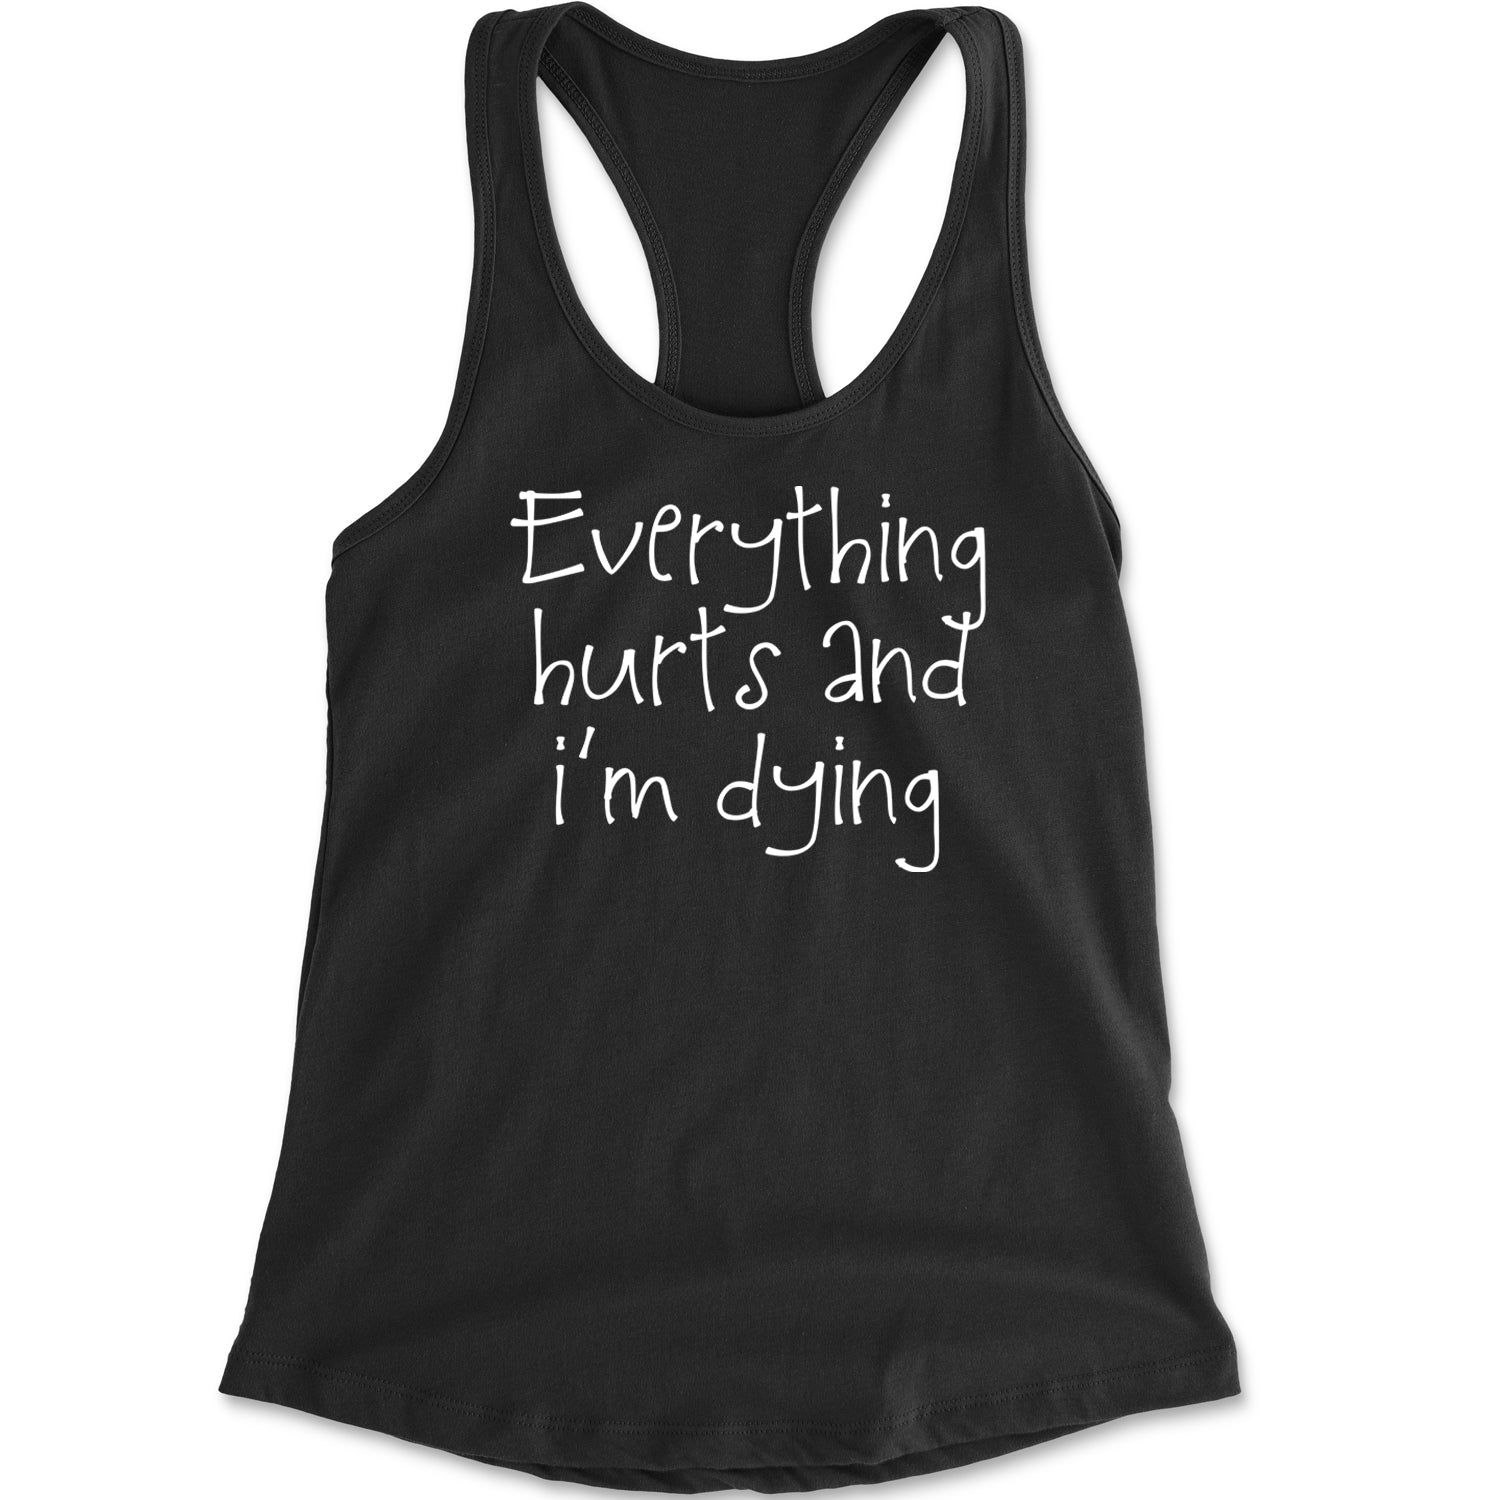 Everything Hurts And I'm Dying Racerback Tank Top for Women